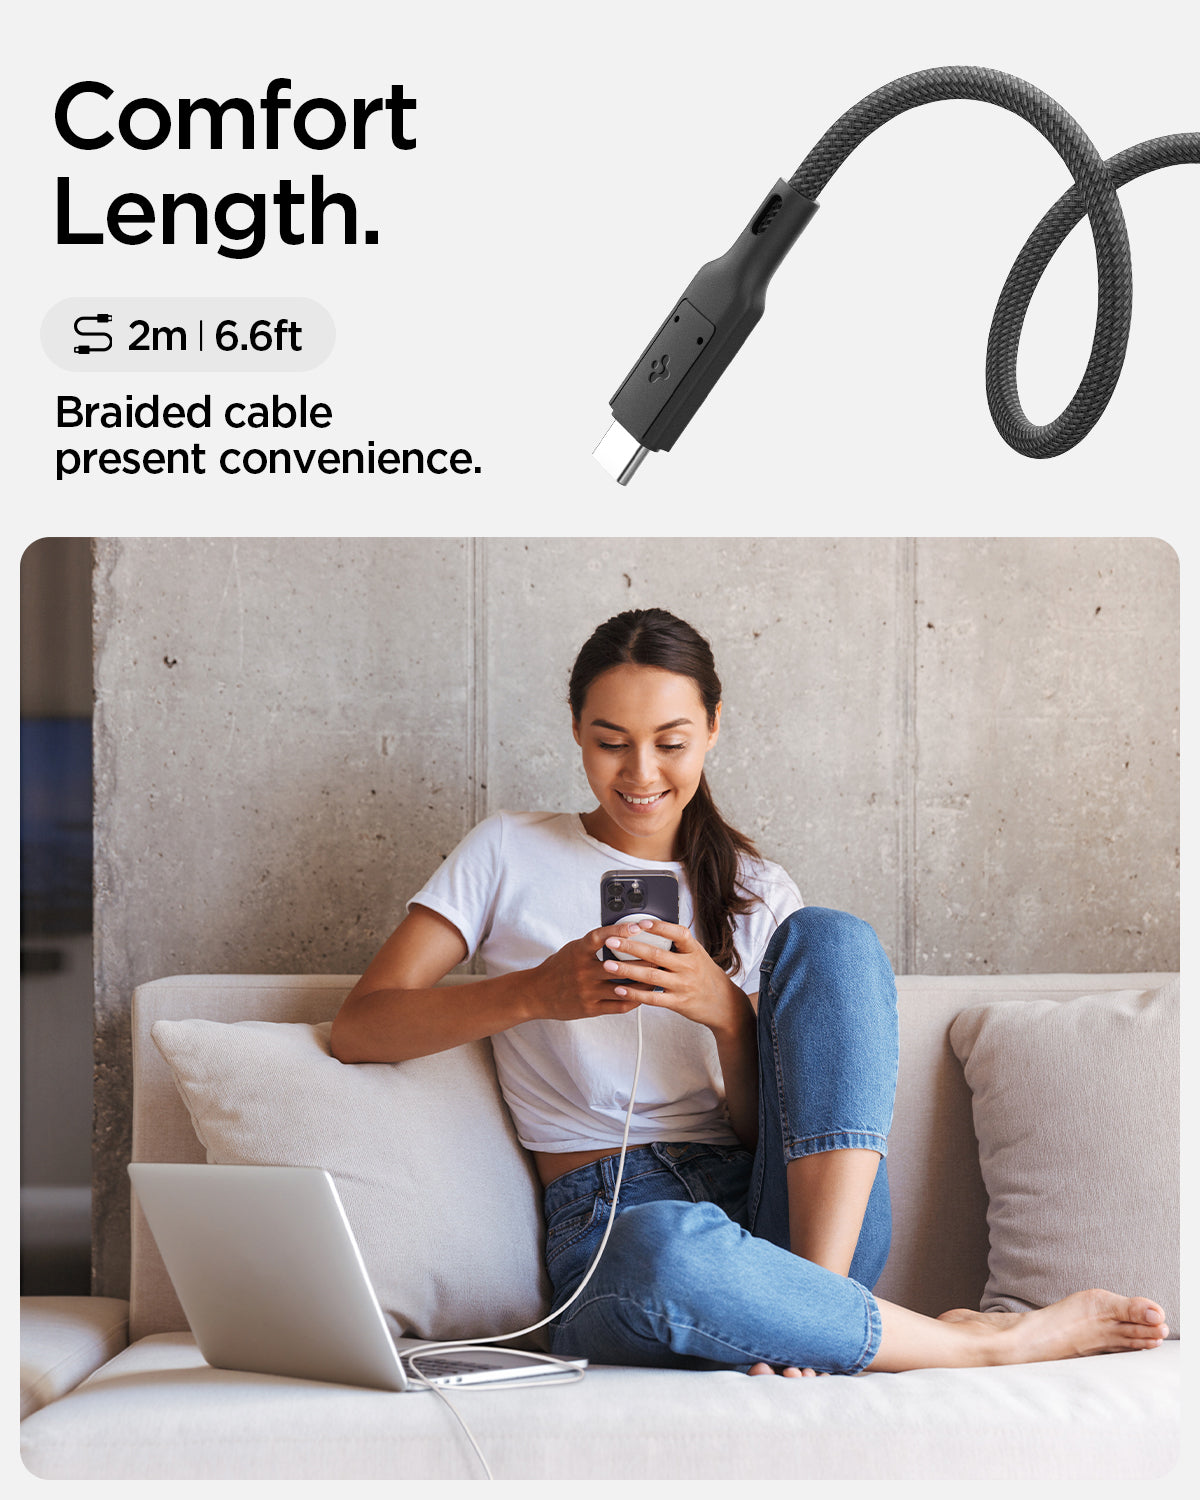 ACH05429 - ArcField™ Magnetic 15W Wireless Charger PF2200 (MagFit) in Black showing the Comfort Length. 2m (6.6ft) Braided cable present convenience. A girl sitting while holding a device attached to a Magsafe Charger and another device